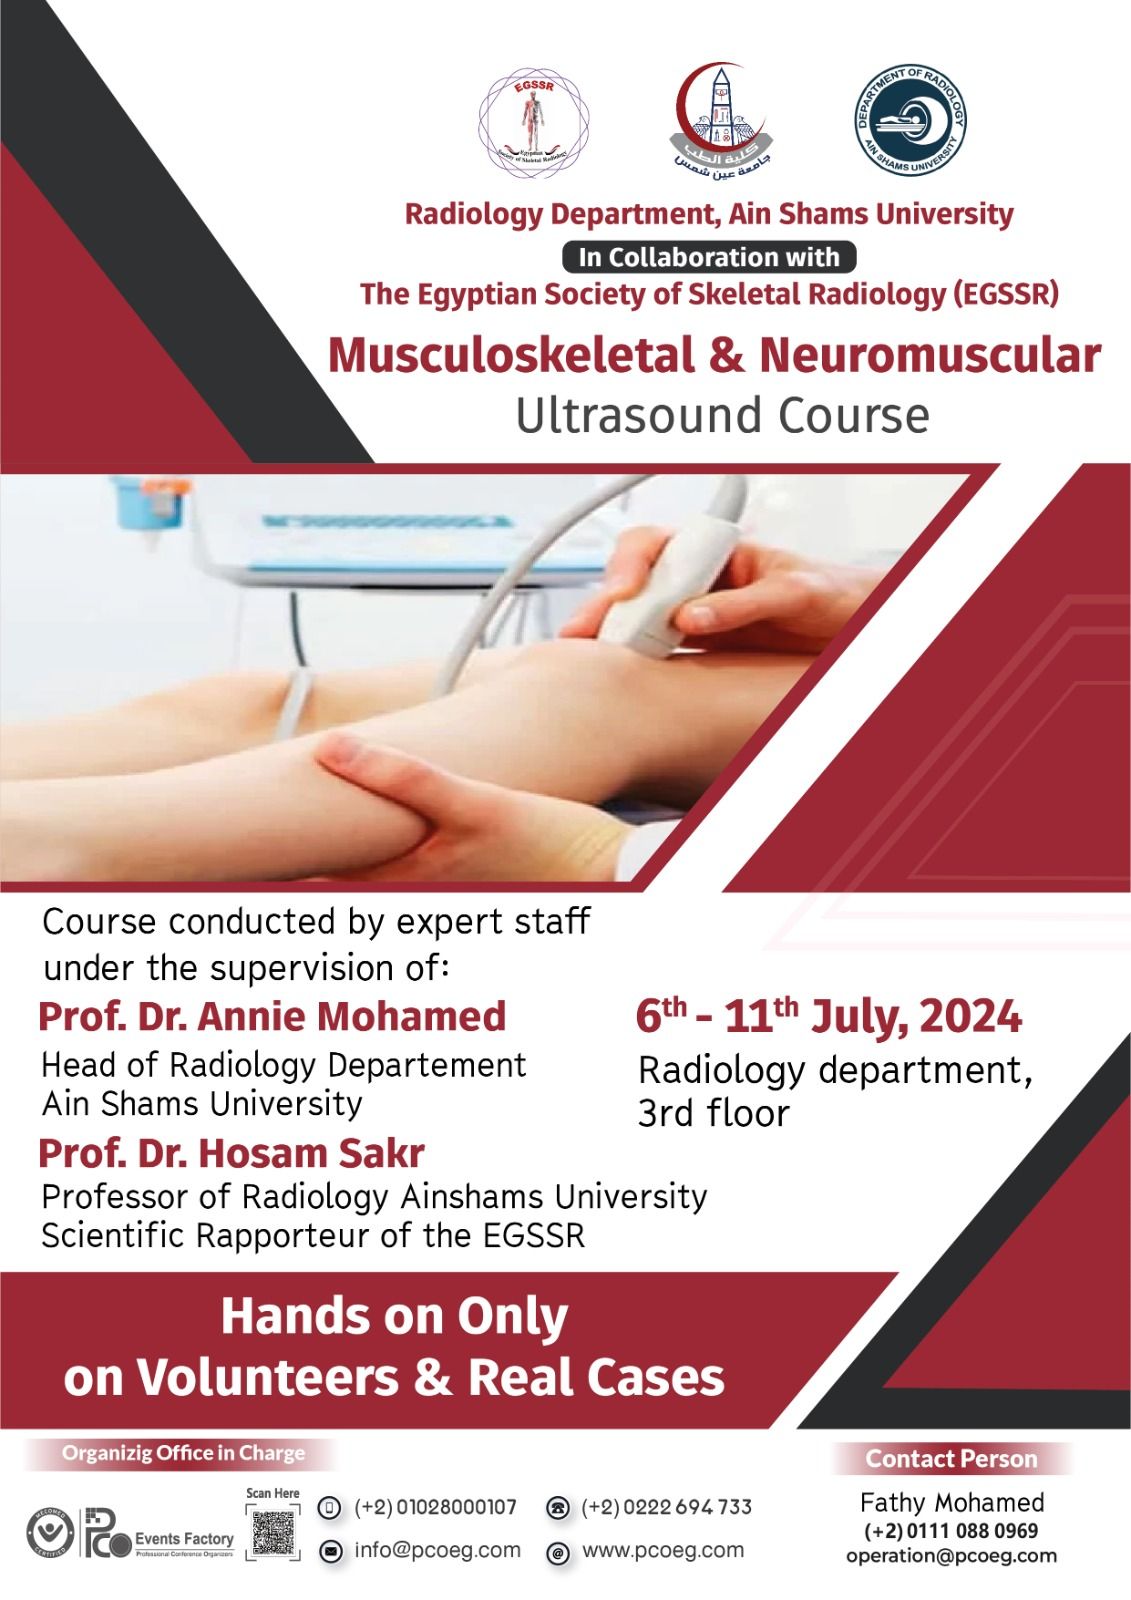 Musculoskeletal Ultrasound Course \u2018Hands on only On Volunteers & Real Cases\u2019